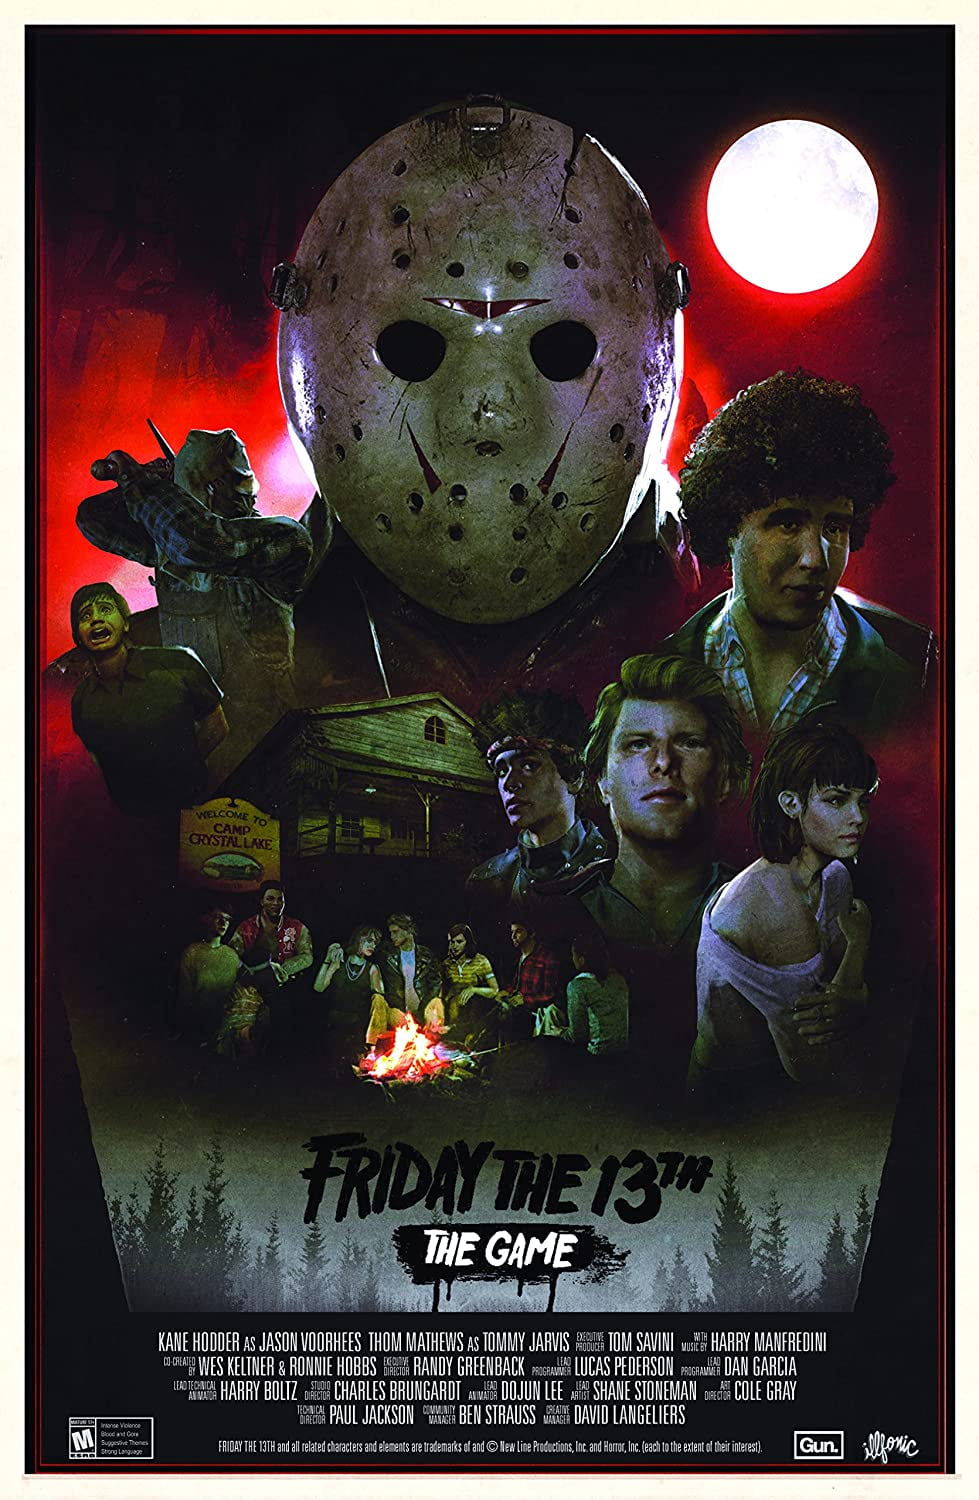 Friday the 13th' is coming to Nintendo Switch this spring